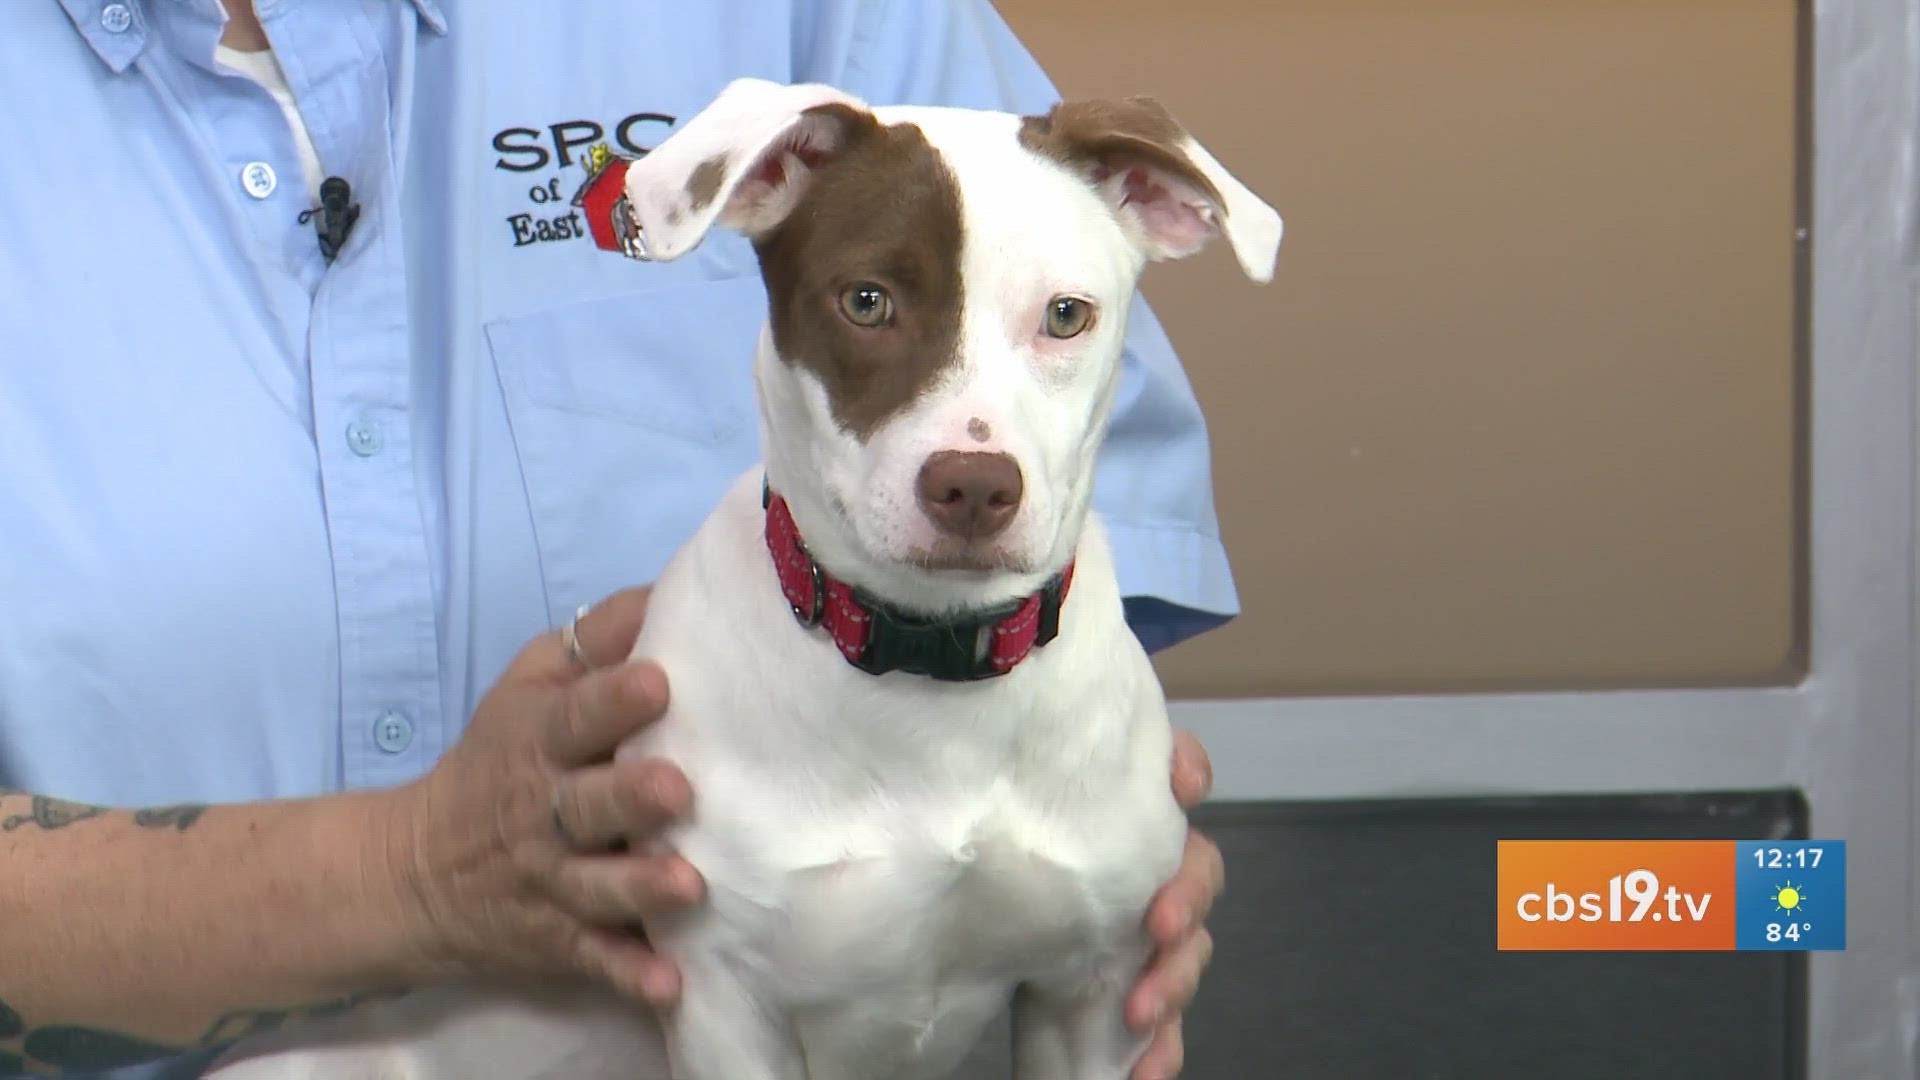 TUESDAY TAILS: Meet Slinky from the SPCA of East Texas